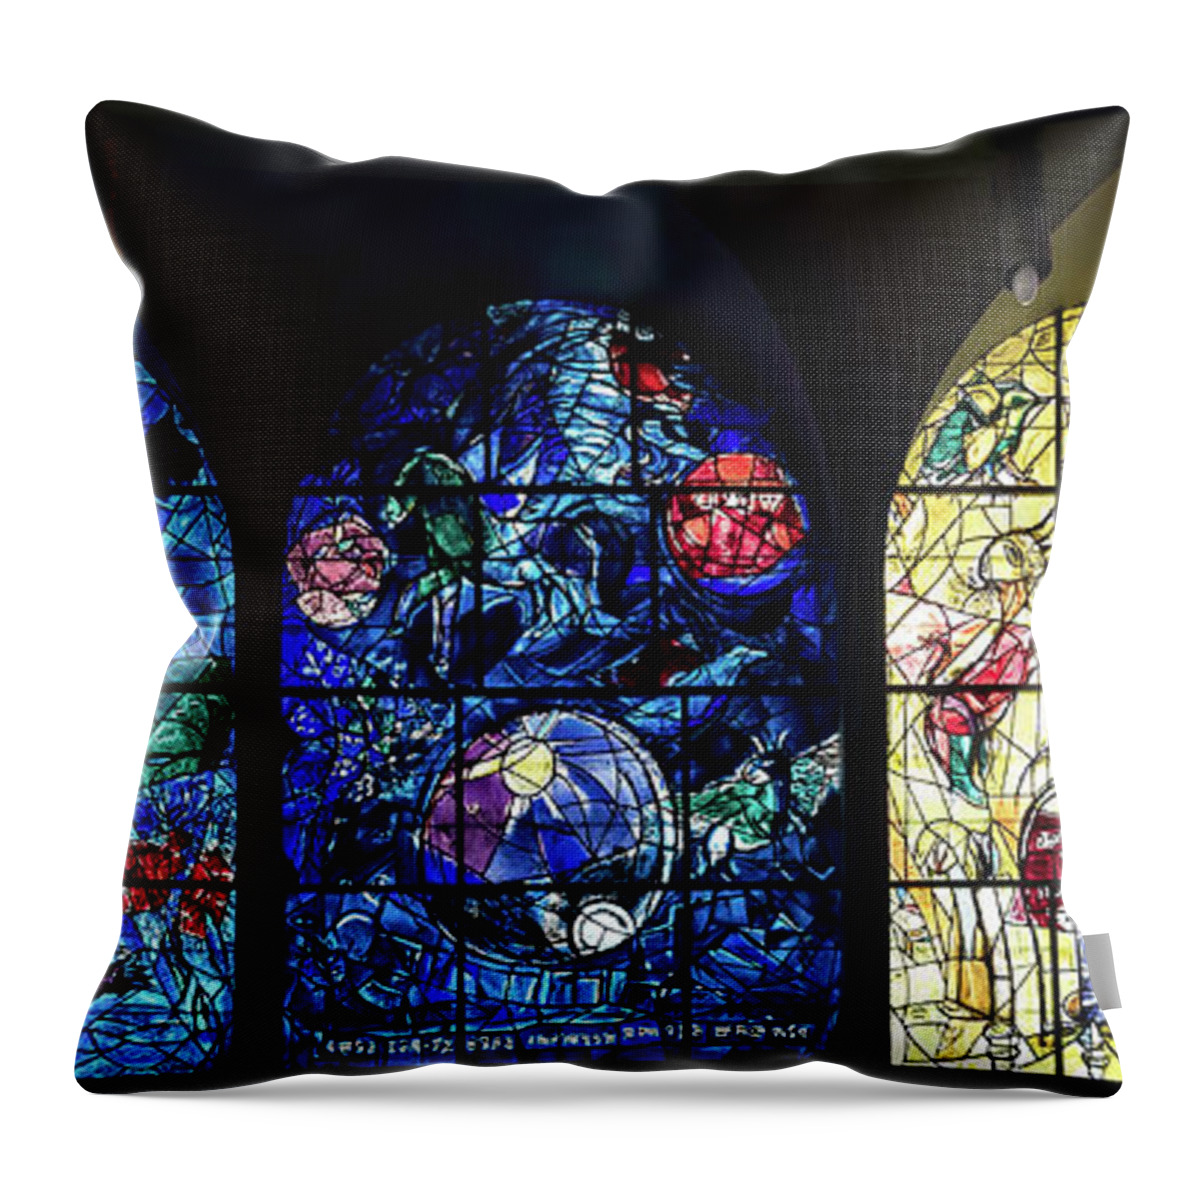 Photography Throw Pillow featuring the photograph Stained Glass Chagall Windows #1 by Panoramic Images